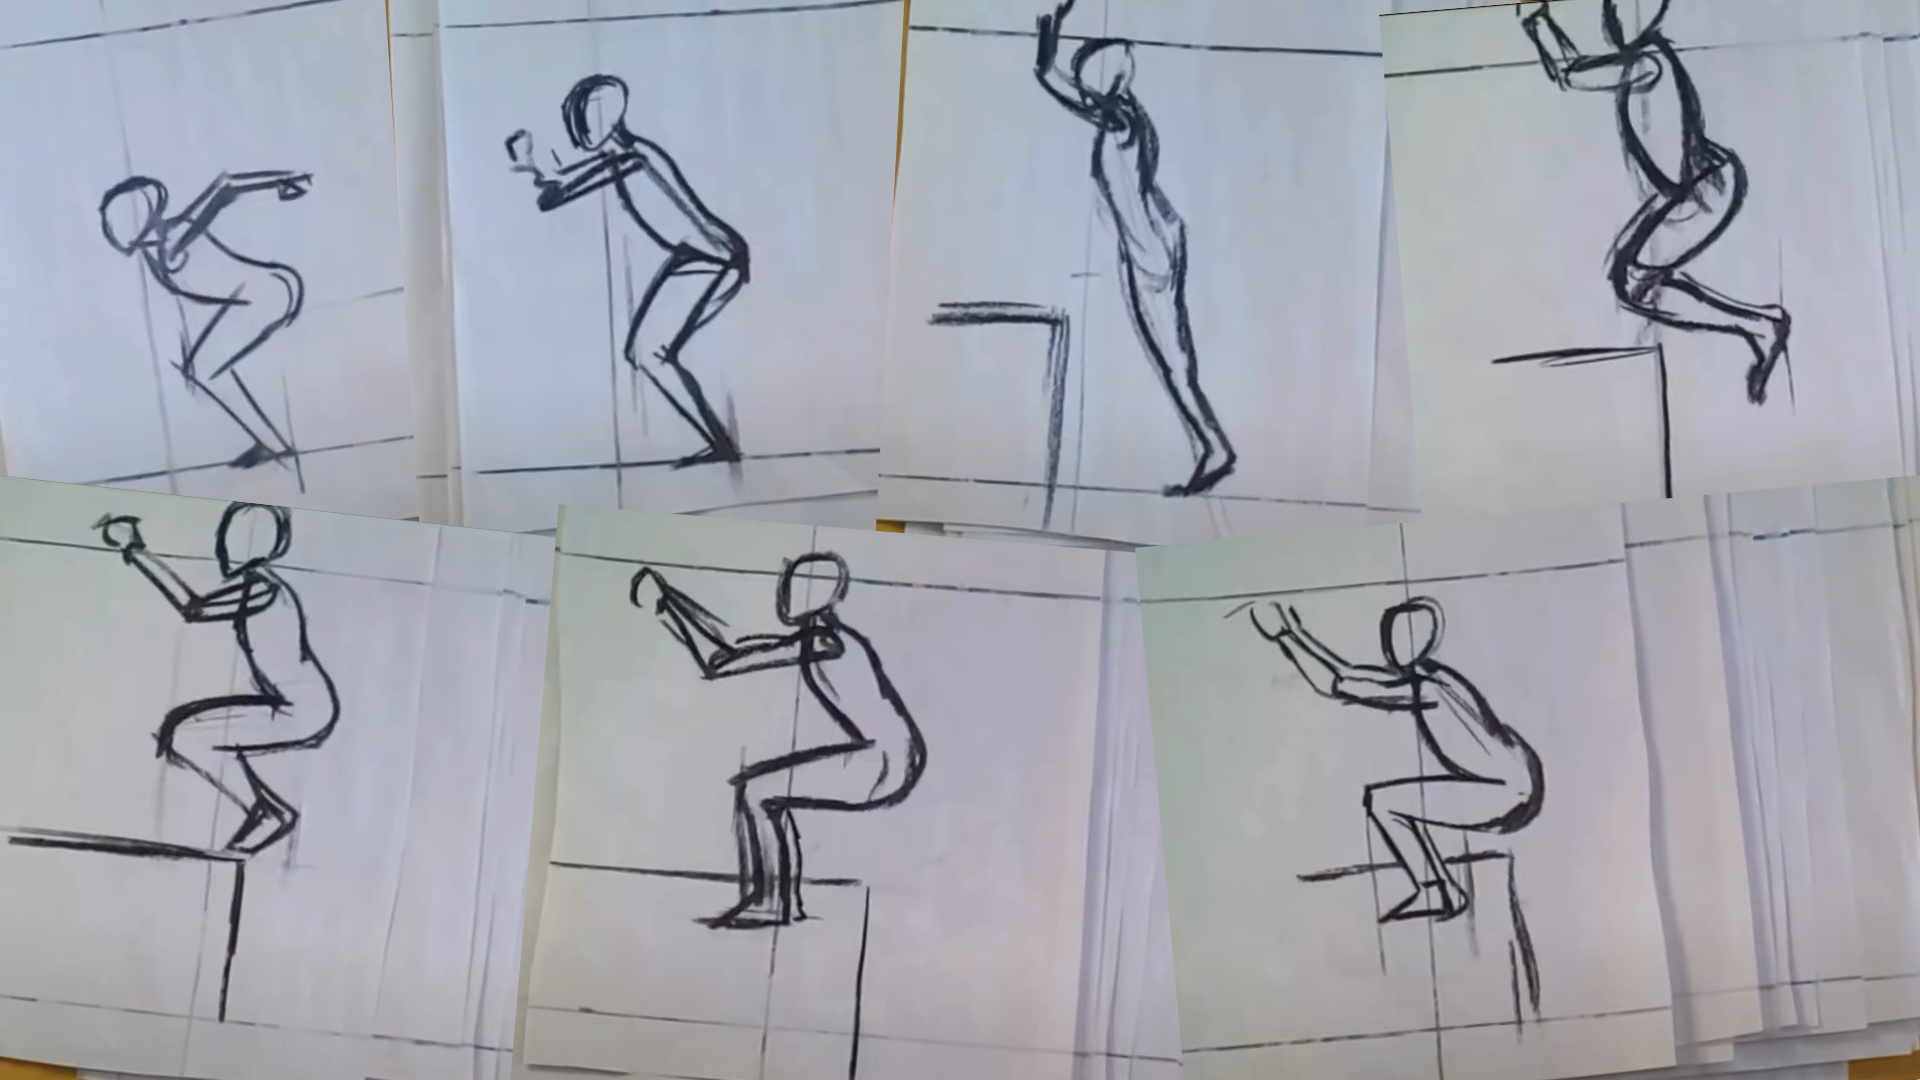 A series of charcoal drawings of a person jumping onto a platform